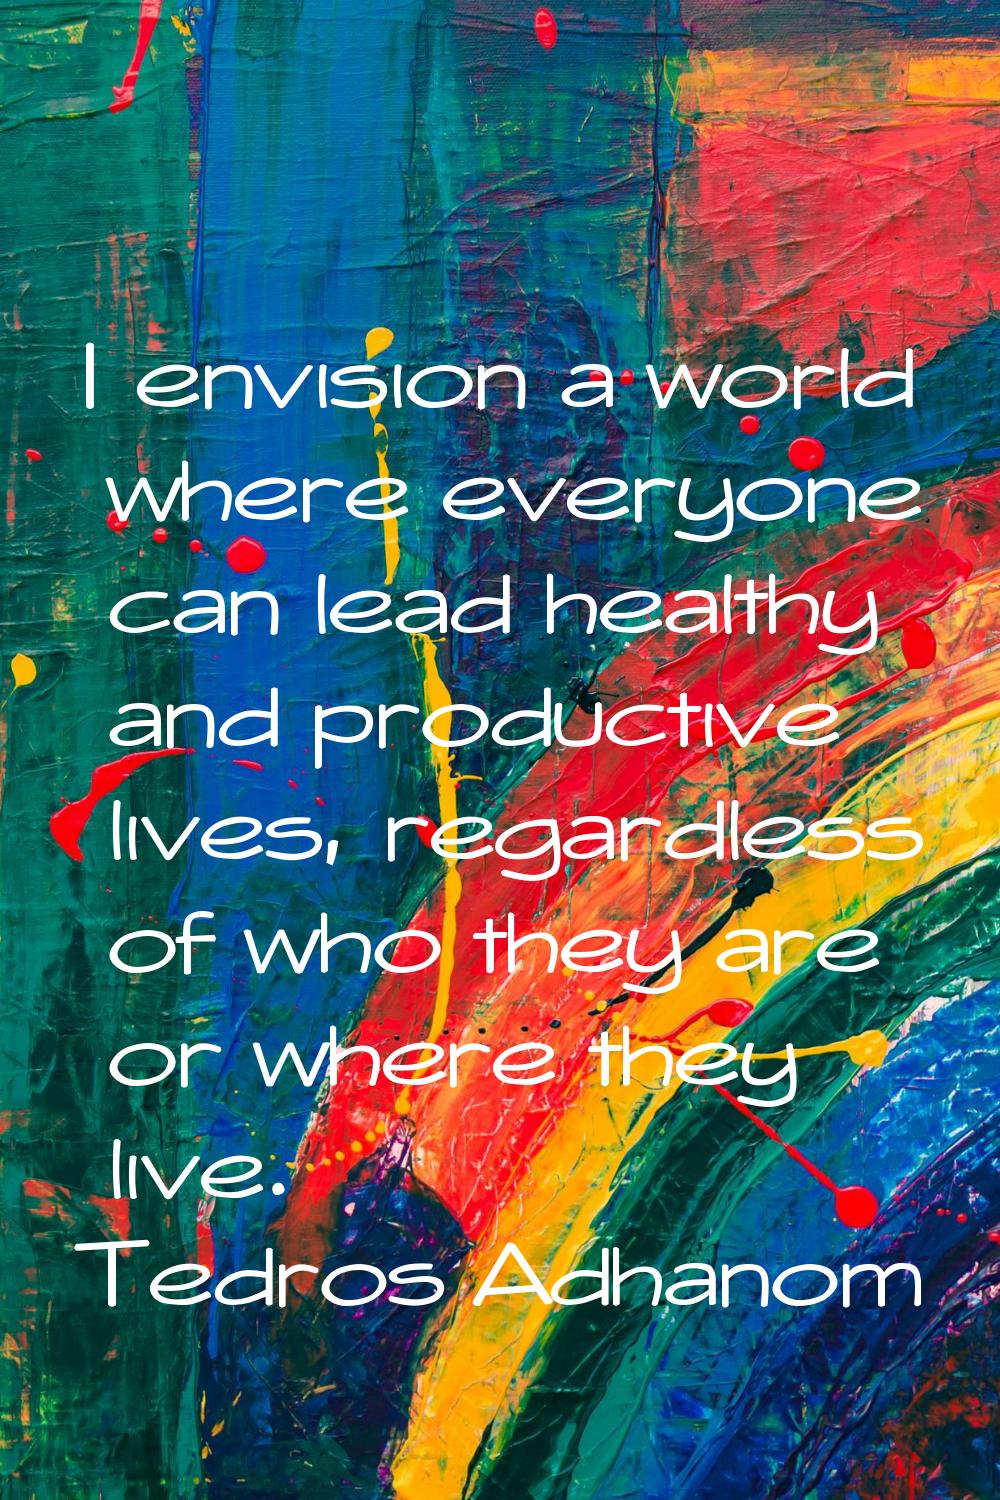 I envision a world where everyone can lead healthy and productive lives, regardless of who they are